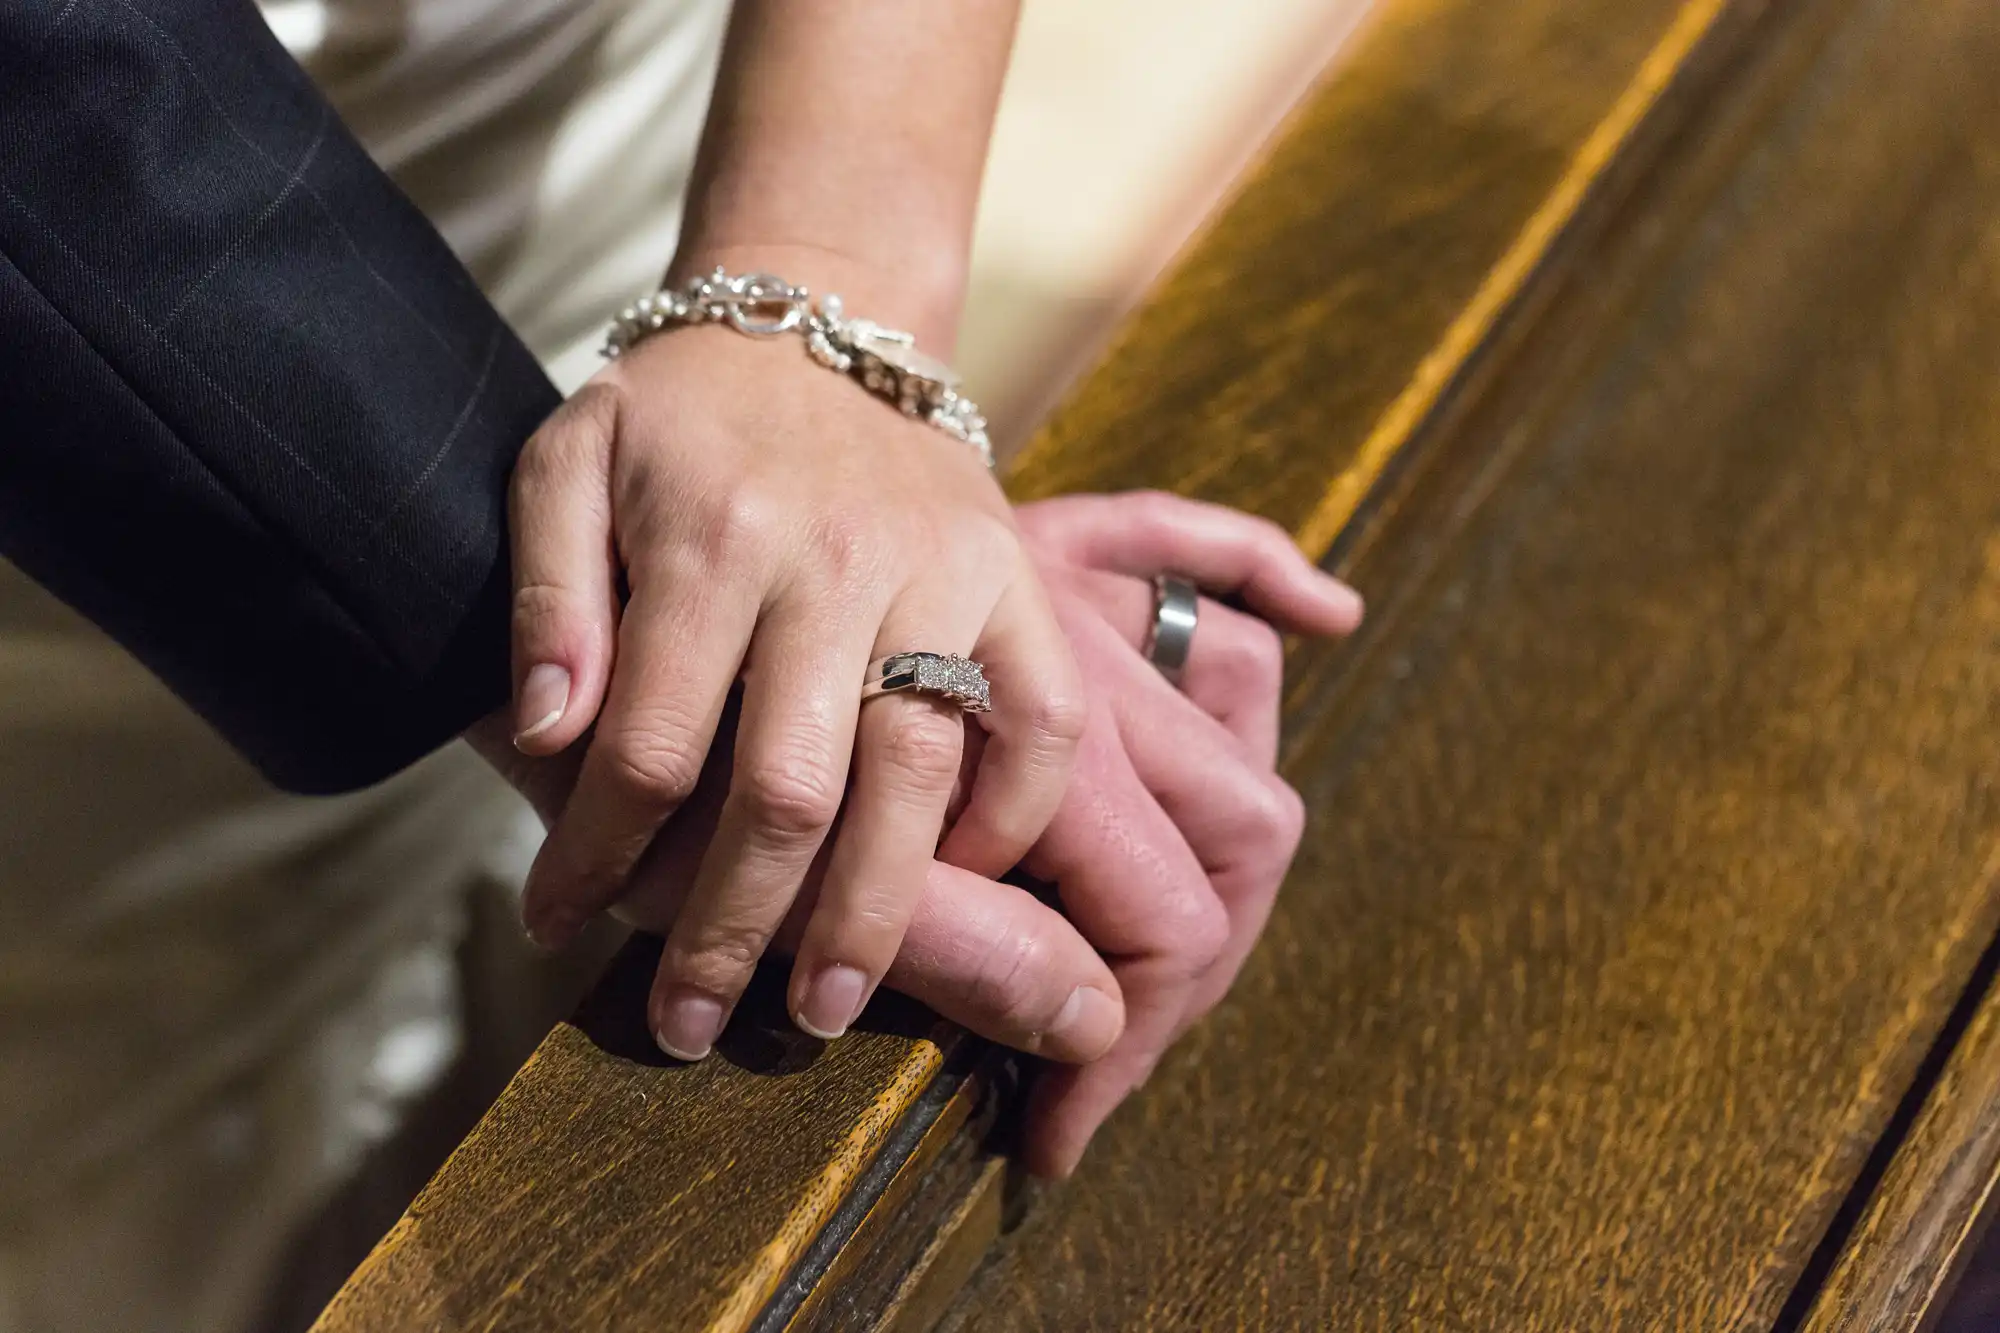 Close-up of a married couple's hands resting on a wooden surface, showcasing their wedding rings.